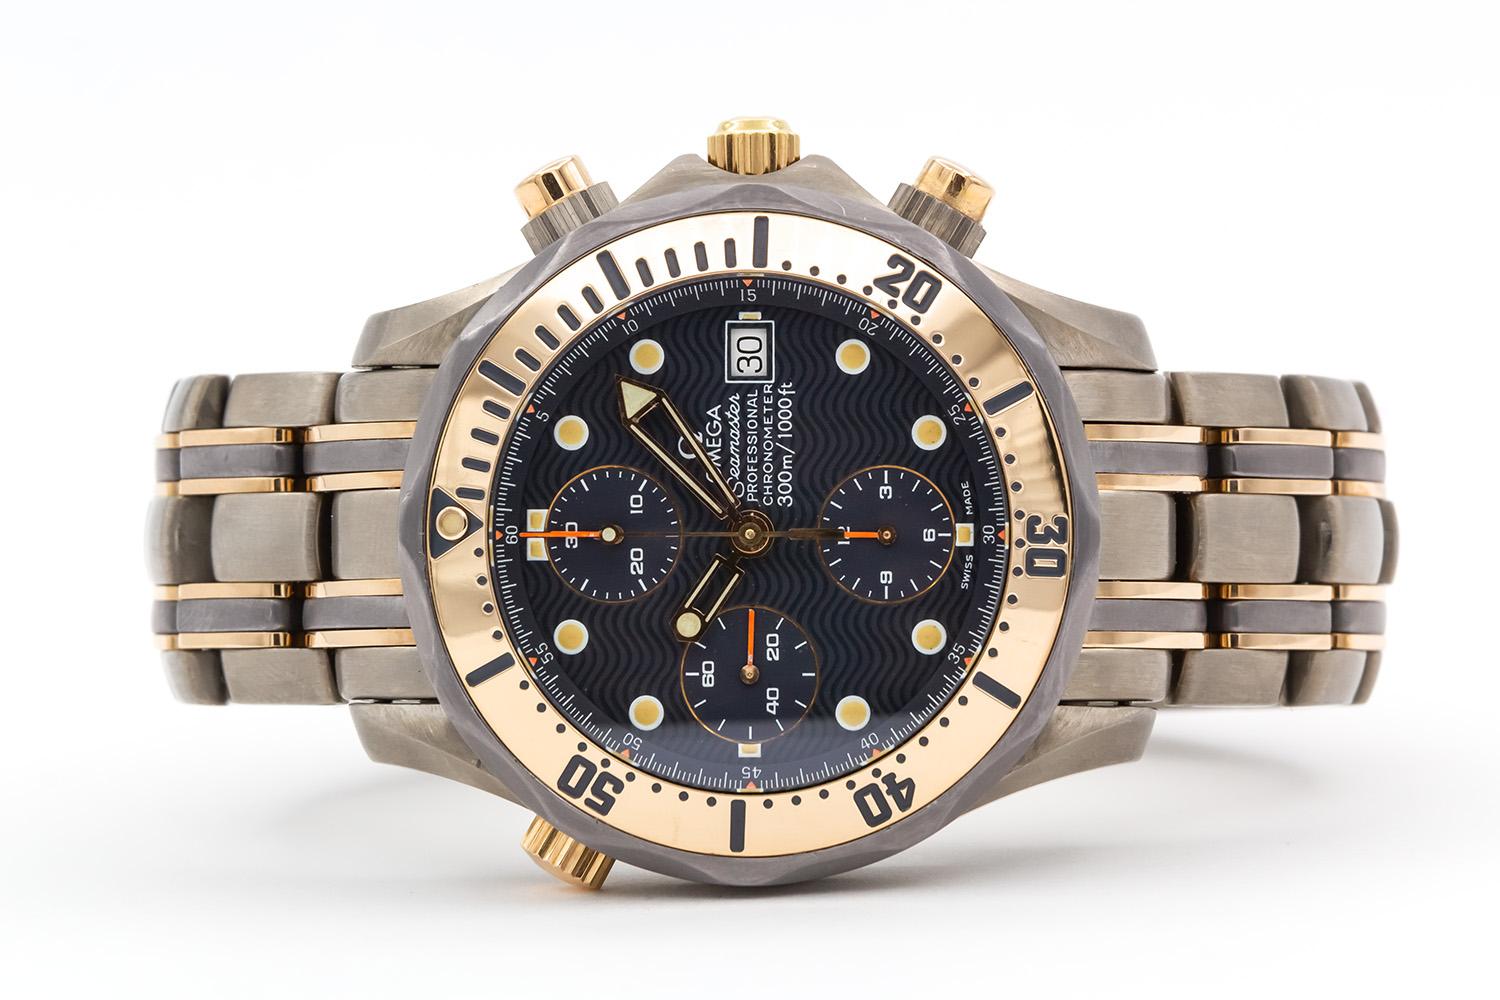 We are pleased to offer this Titanium & 18k Rose Gold Omega Seamaster Professional 300m Chronograph Automatic Watch Reference 2296.80. This watch features a 41.5mm titanium case, automatic chronograph movement, sapphire crystal and blue wave dial.